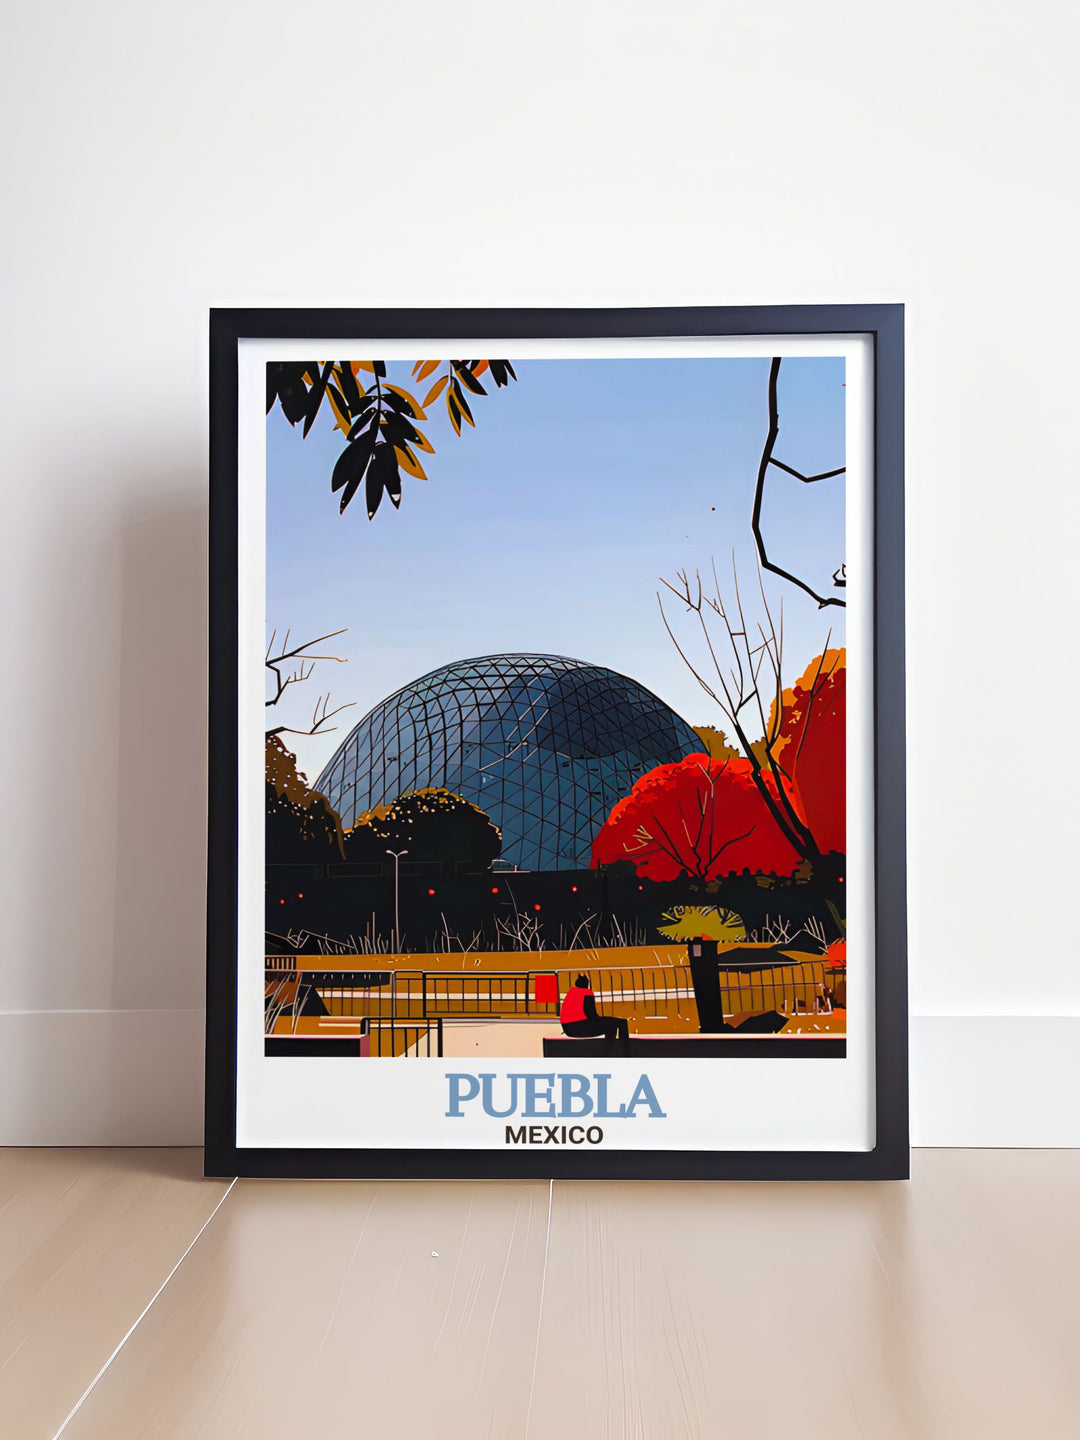 Personalized Puebla Art Print ideal for anniversary gifts birthday gifts and Christmas gifts Parque Ecologico Revolucion Mexicana perfect wall decor capturing the beauty of Mexicos natural landscapes and adding an elegant touch to any home decor